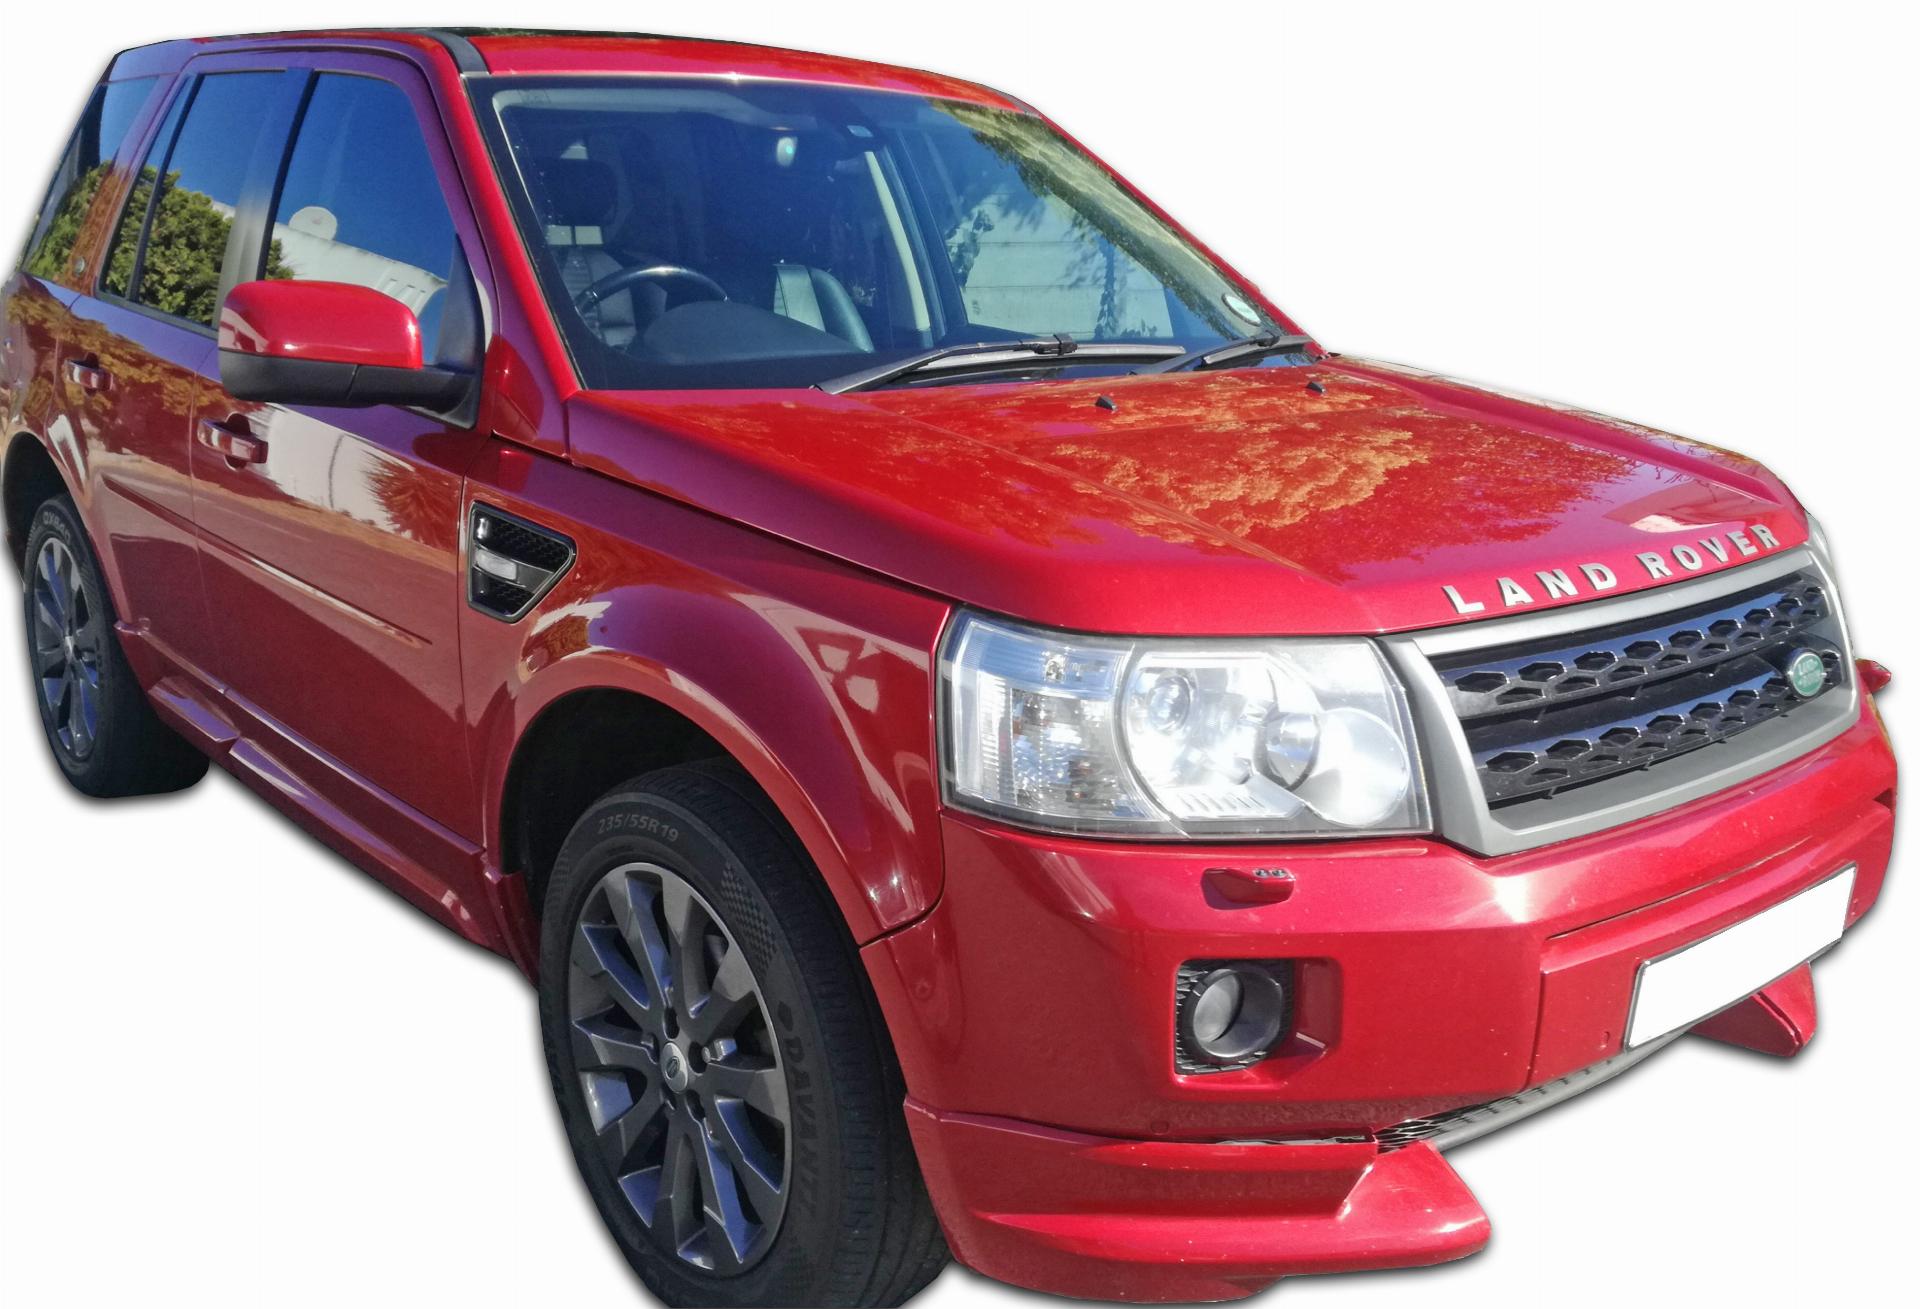 Land Rover Freelander II SD4 Hse Automatic